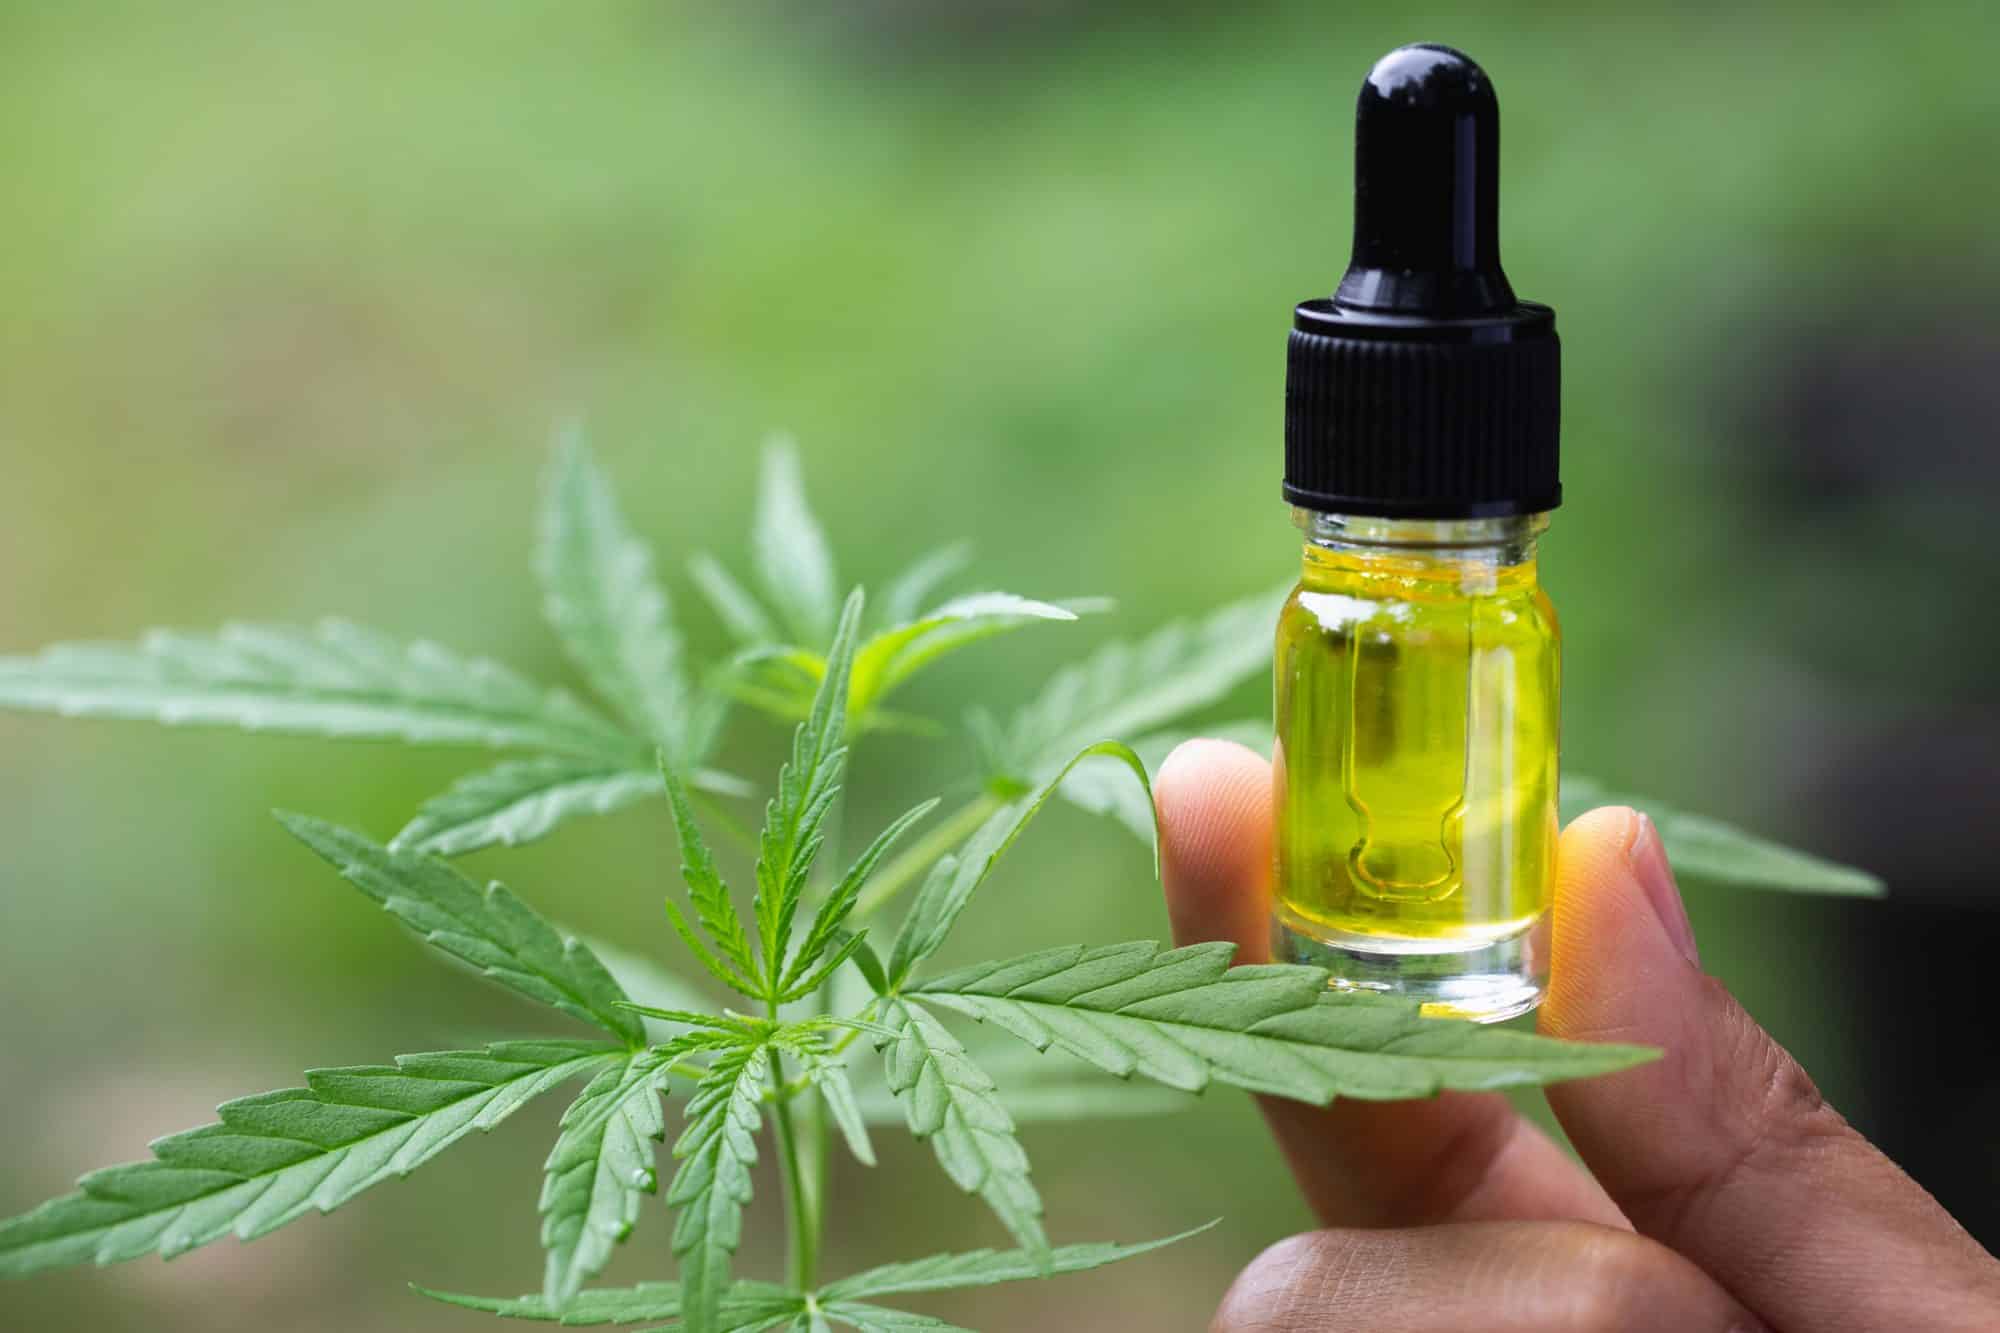 CBD oil and cannabis plant with many health benefits